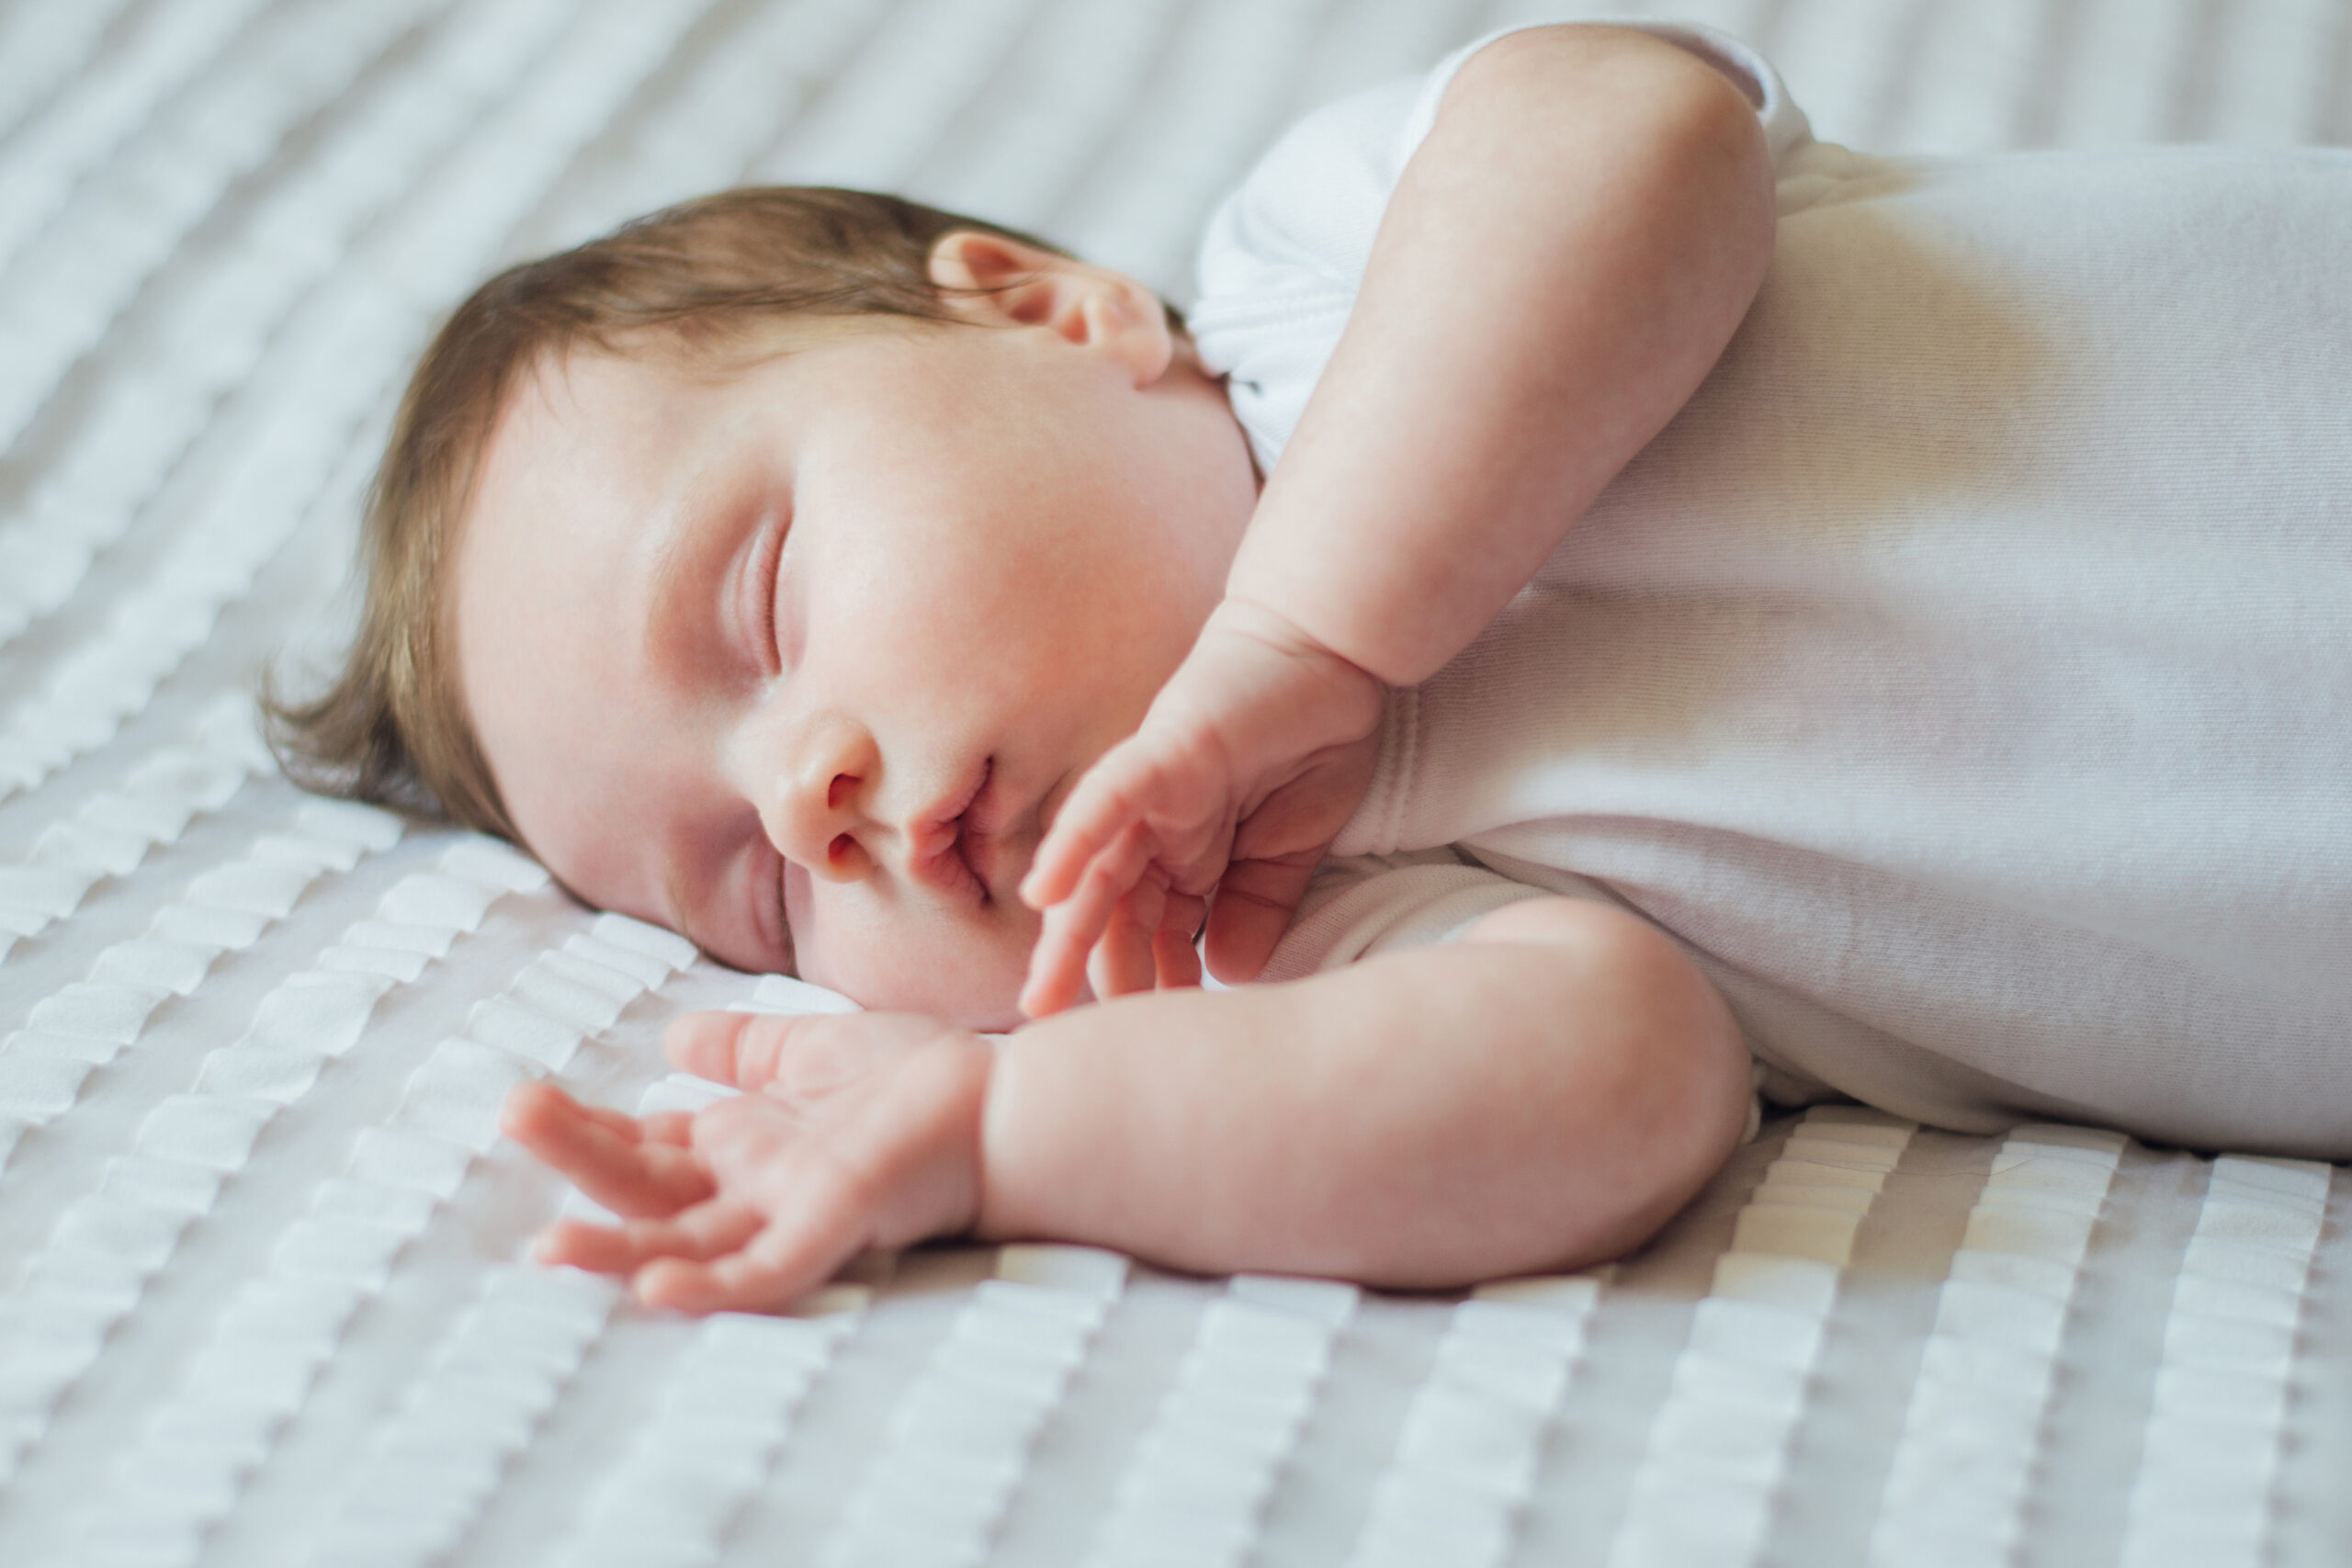 Cute infant child sleeping on white sheets